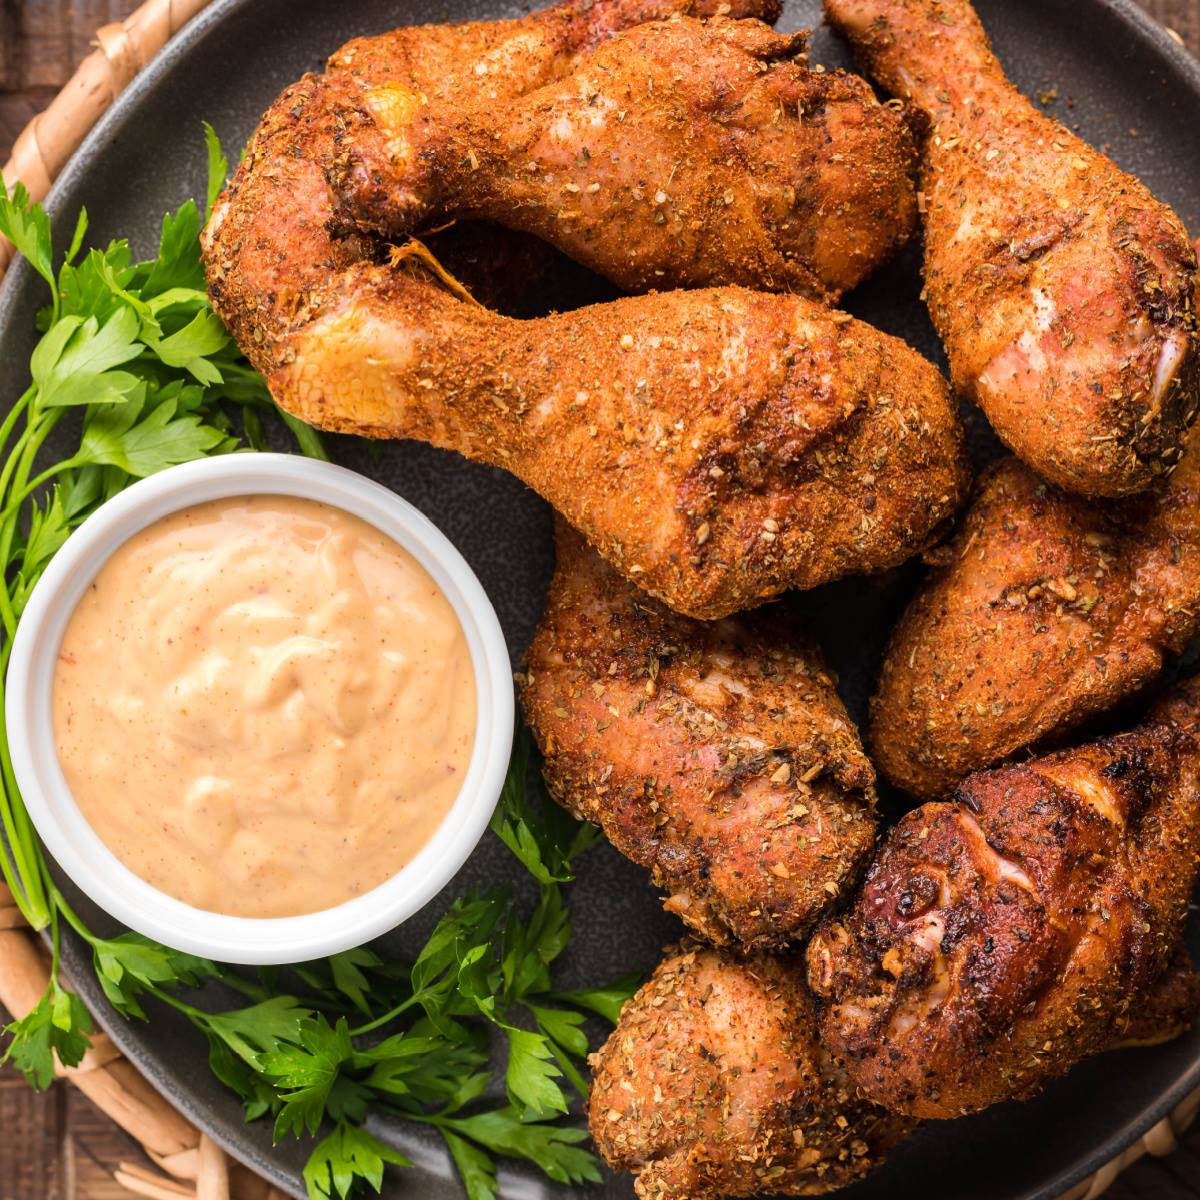 Smoked dry rub chicken drumsticks on a dark platter with a small bowl of chipotle aioli and a spring of parsley.